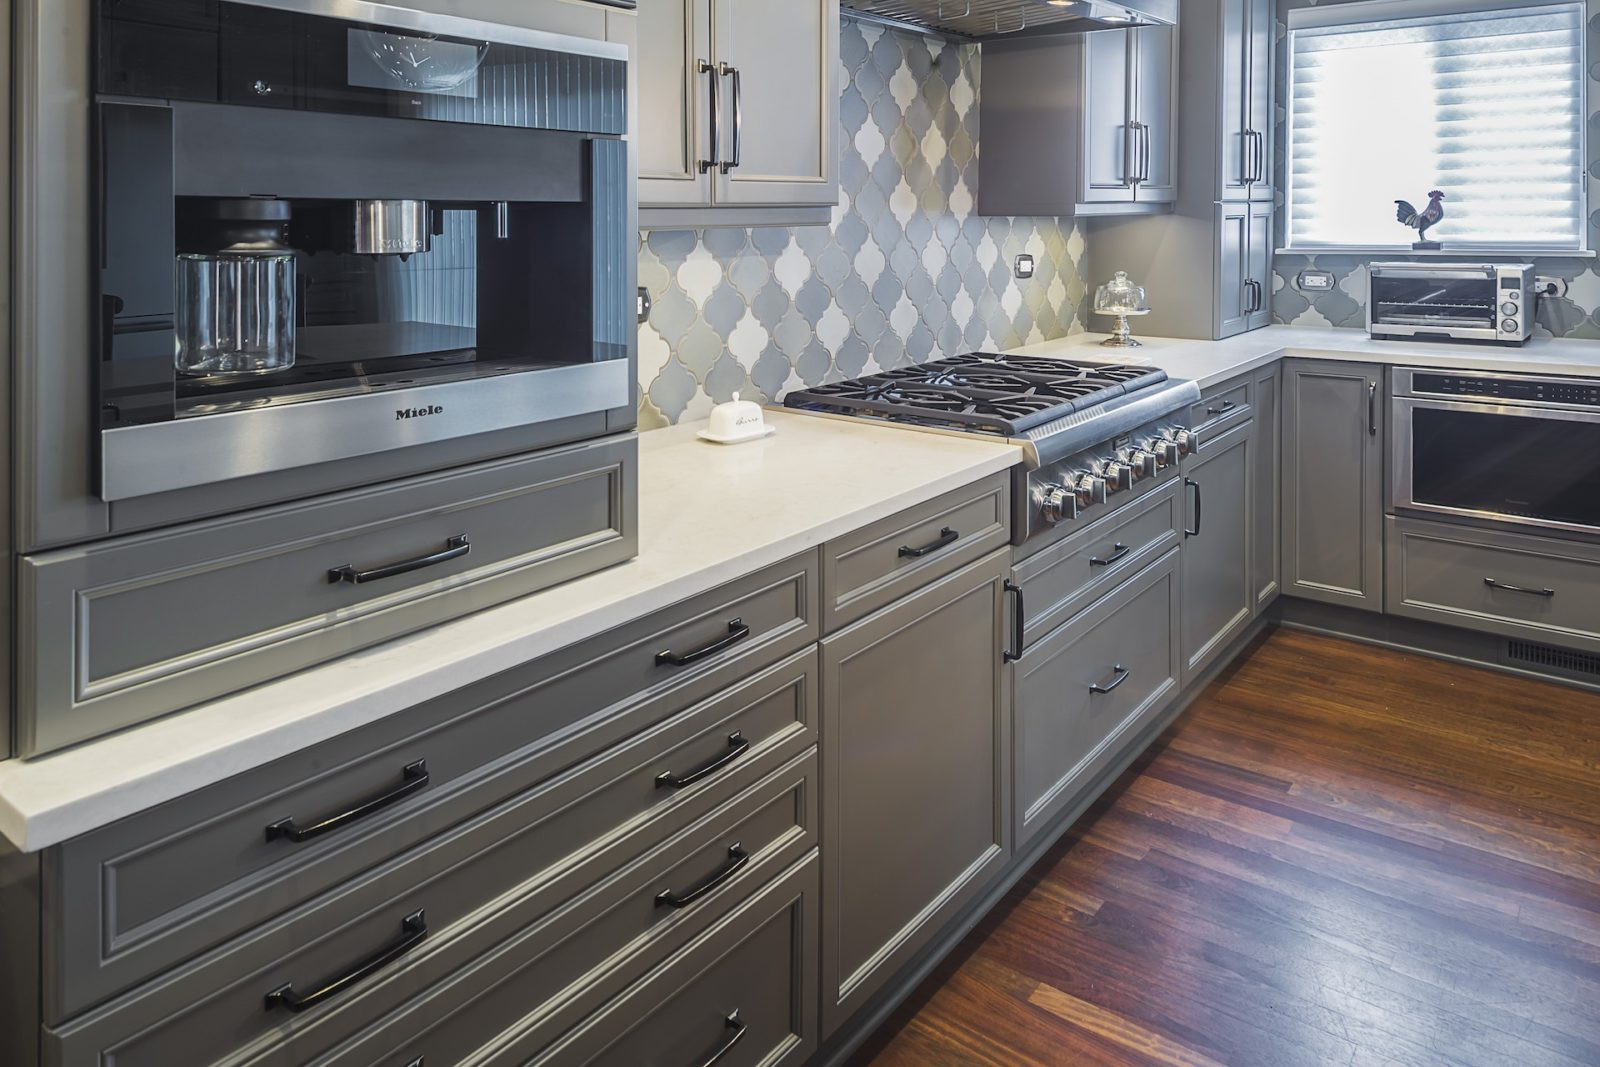 Kitchen Cabinet With Counter
 Kitchen Cabinets & Countertops Naperville IL